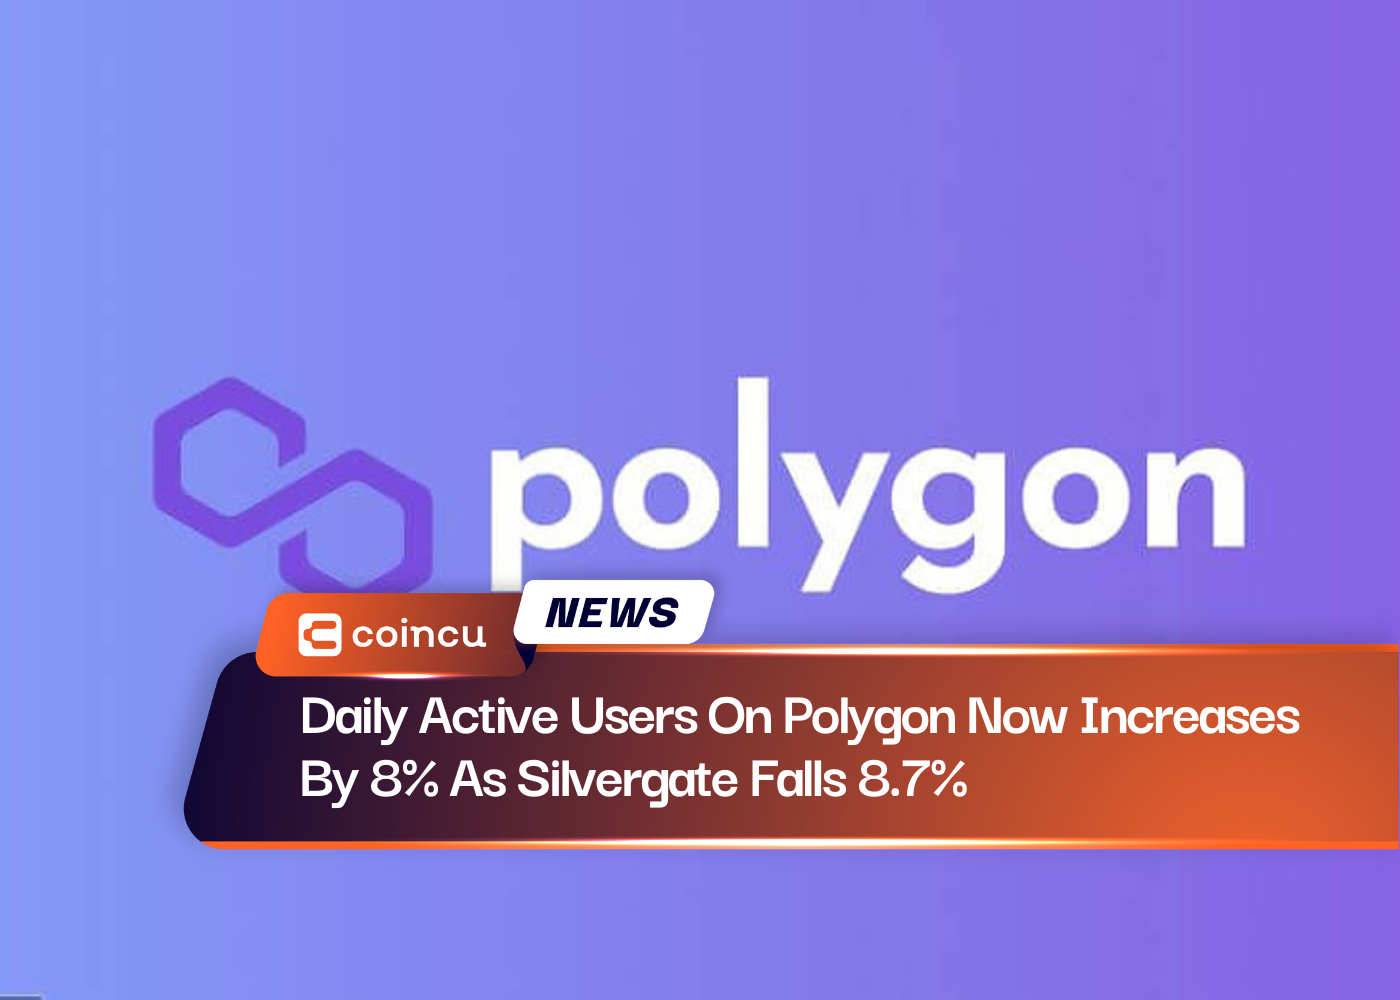 Daily Active Users On Polygon Now Increases By 8% As Silvergate Falls 8.7%